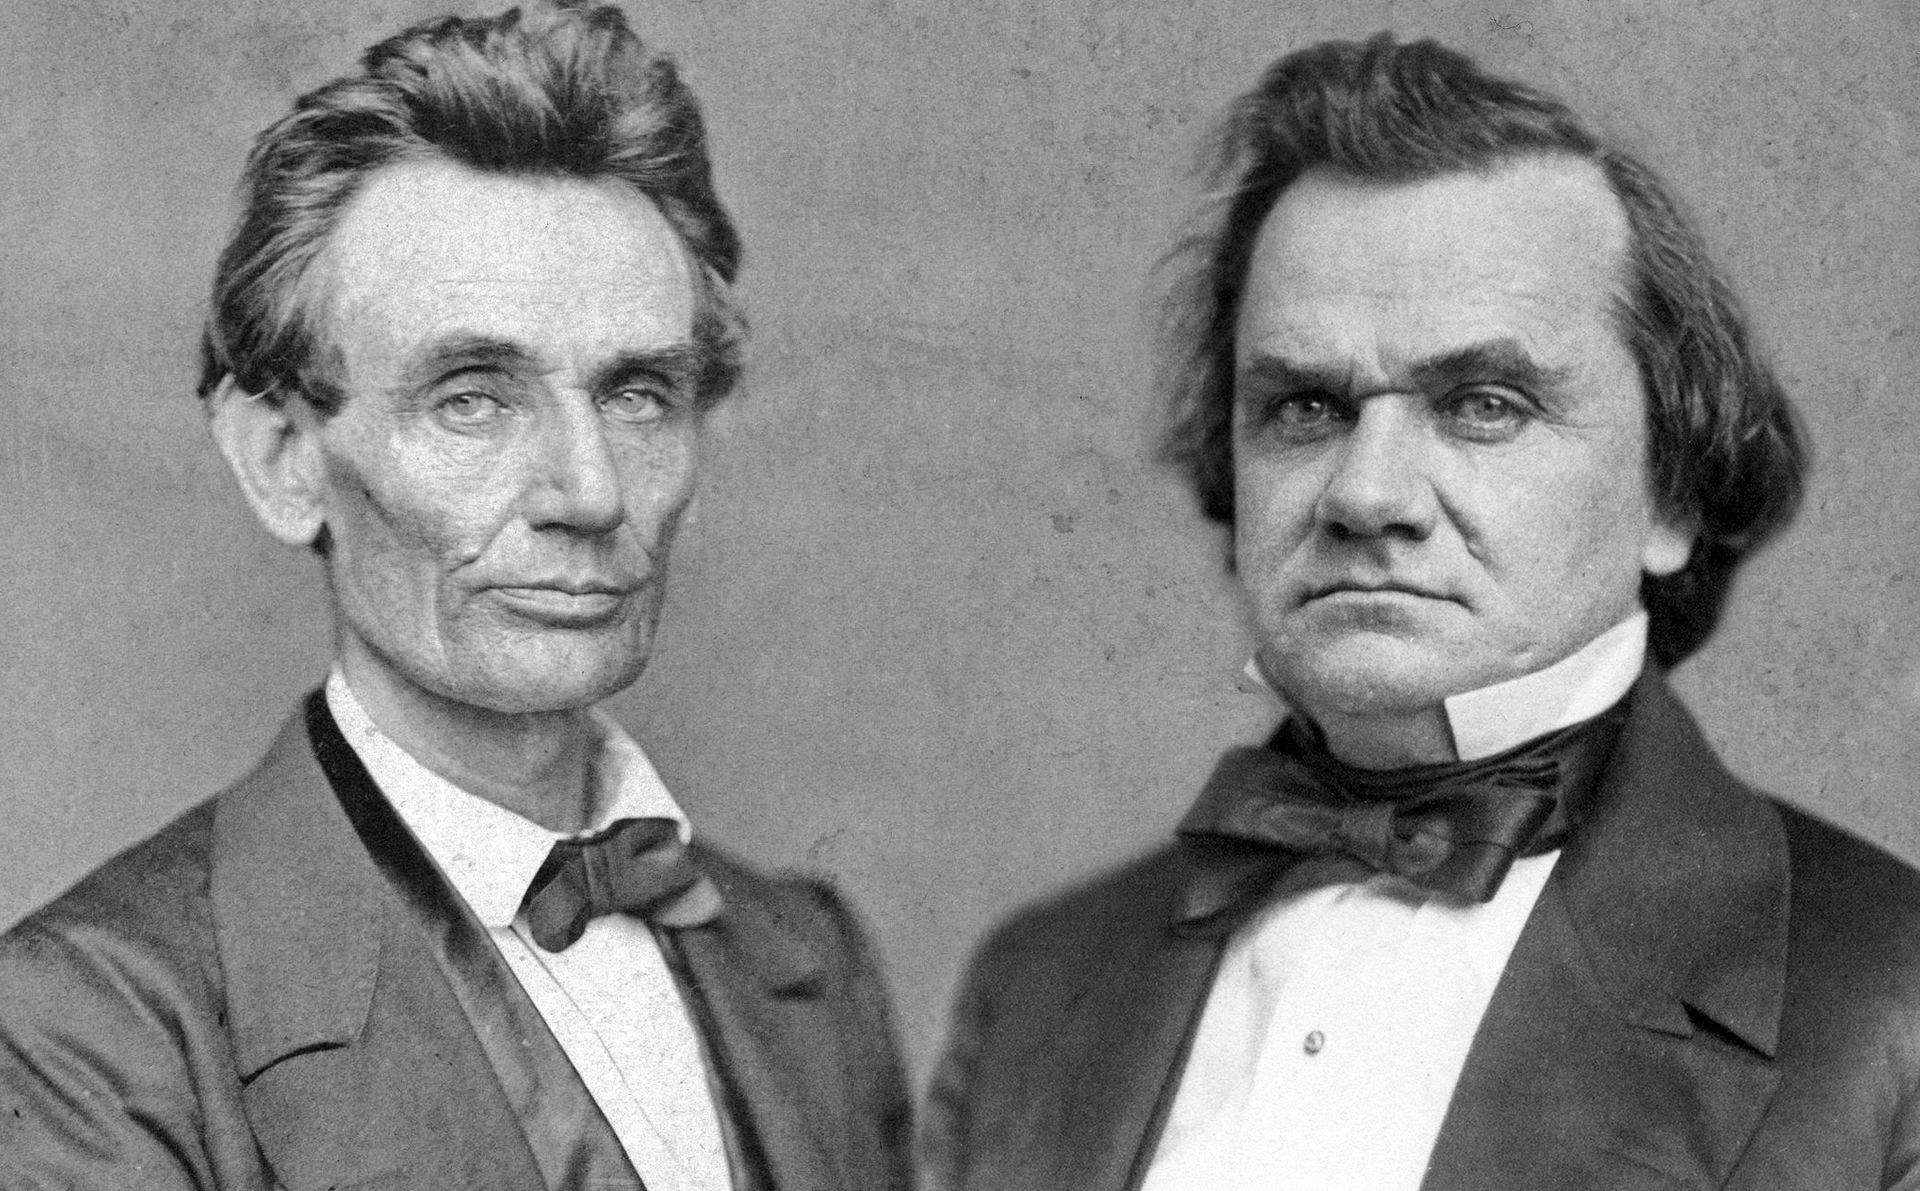 Historic black and white portraits of Abraham Lincoln and Stephen Douglas, during their race for the Senate in 1858